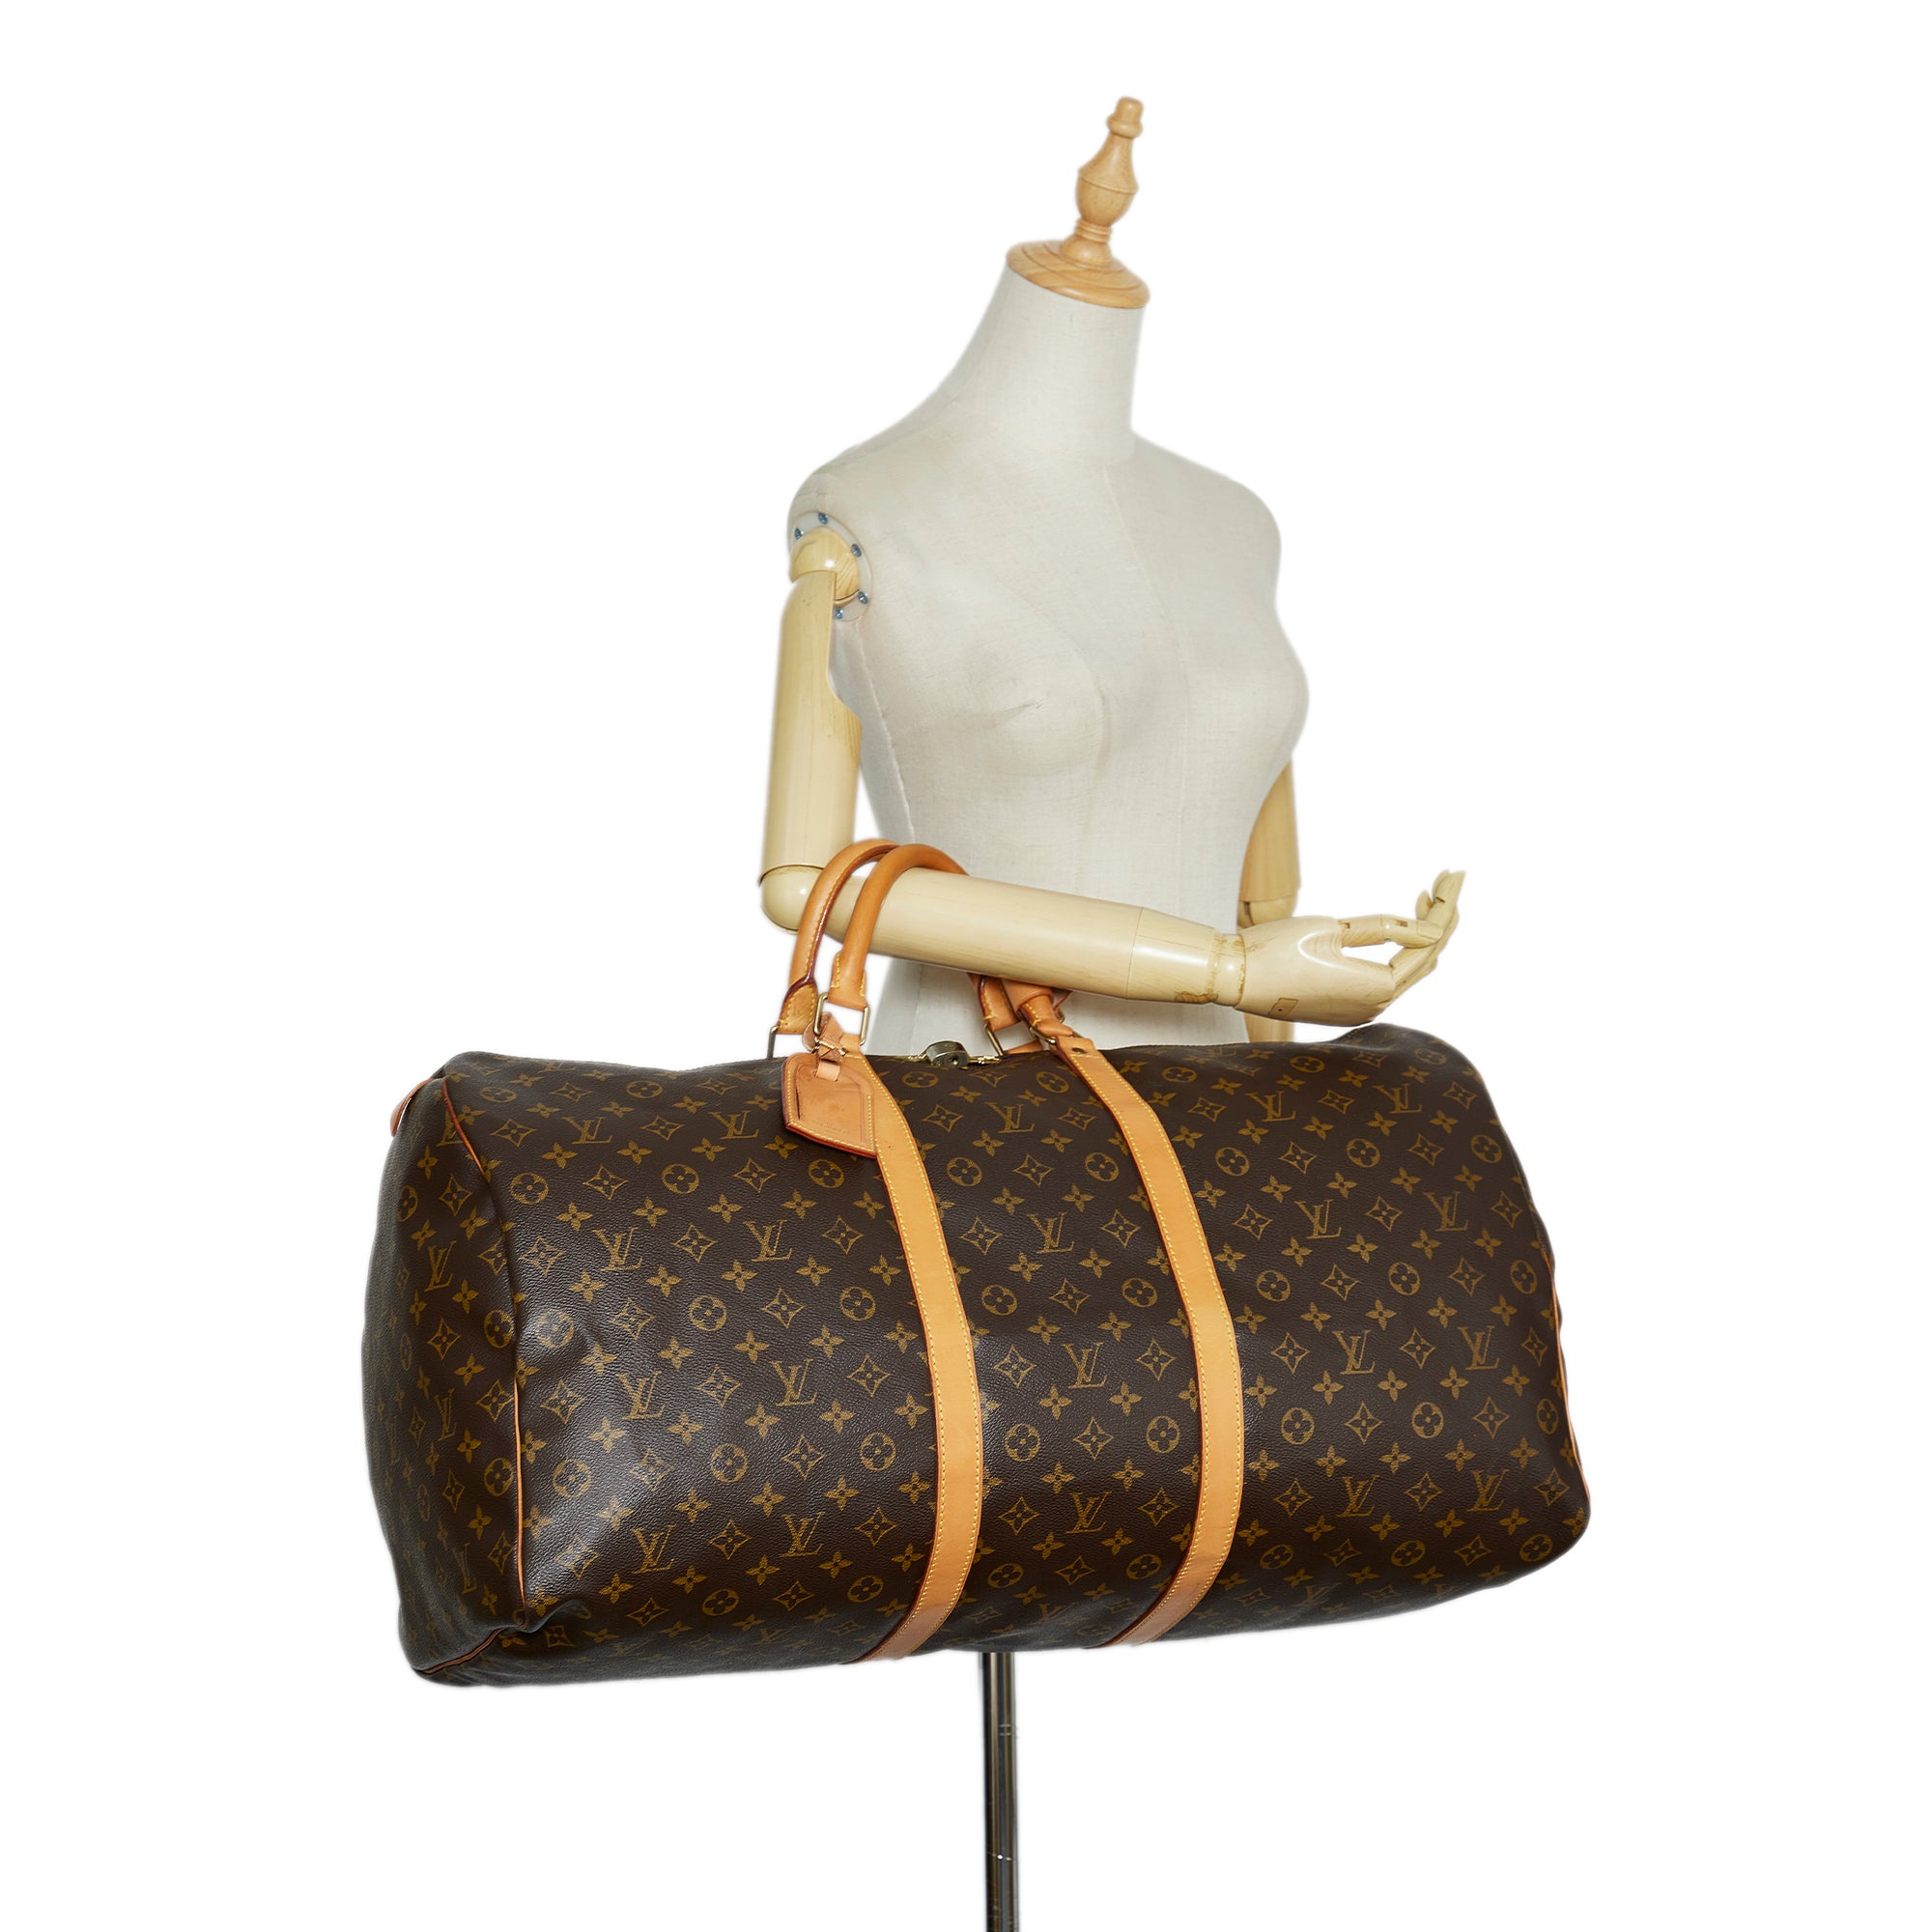 Past auction: Two large Louis Vuitton Keepall duffel bags France